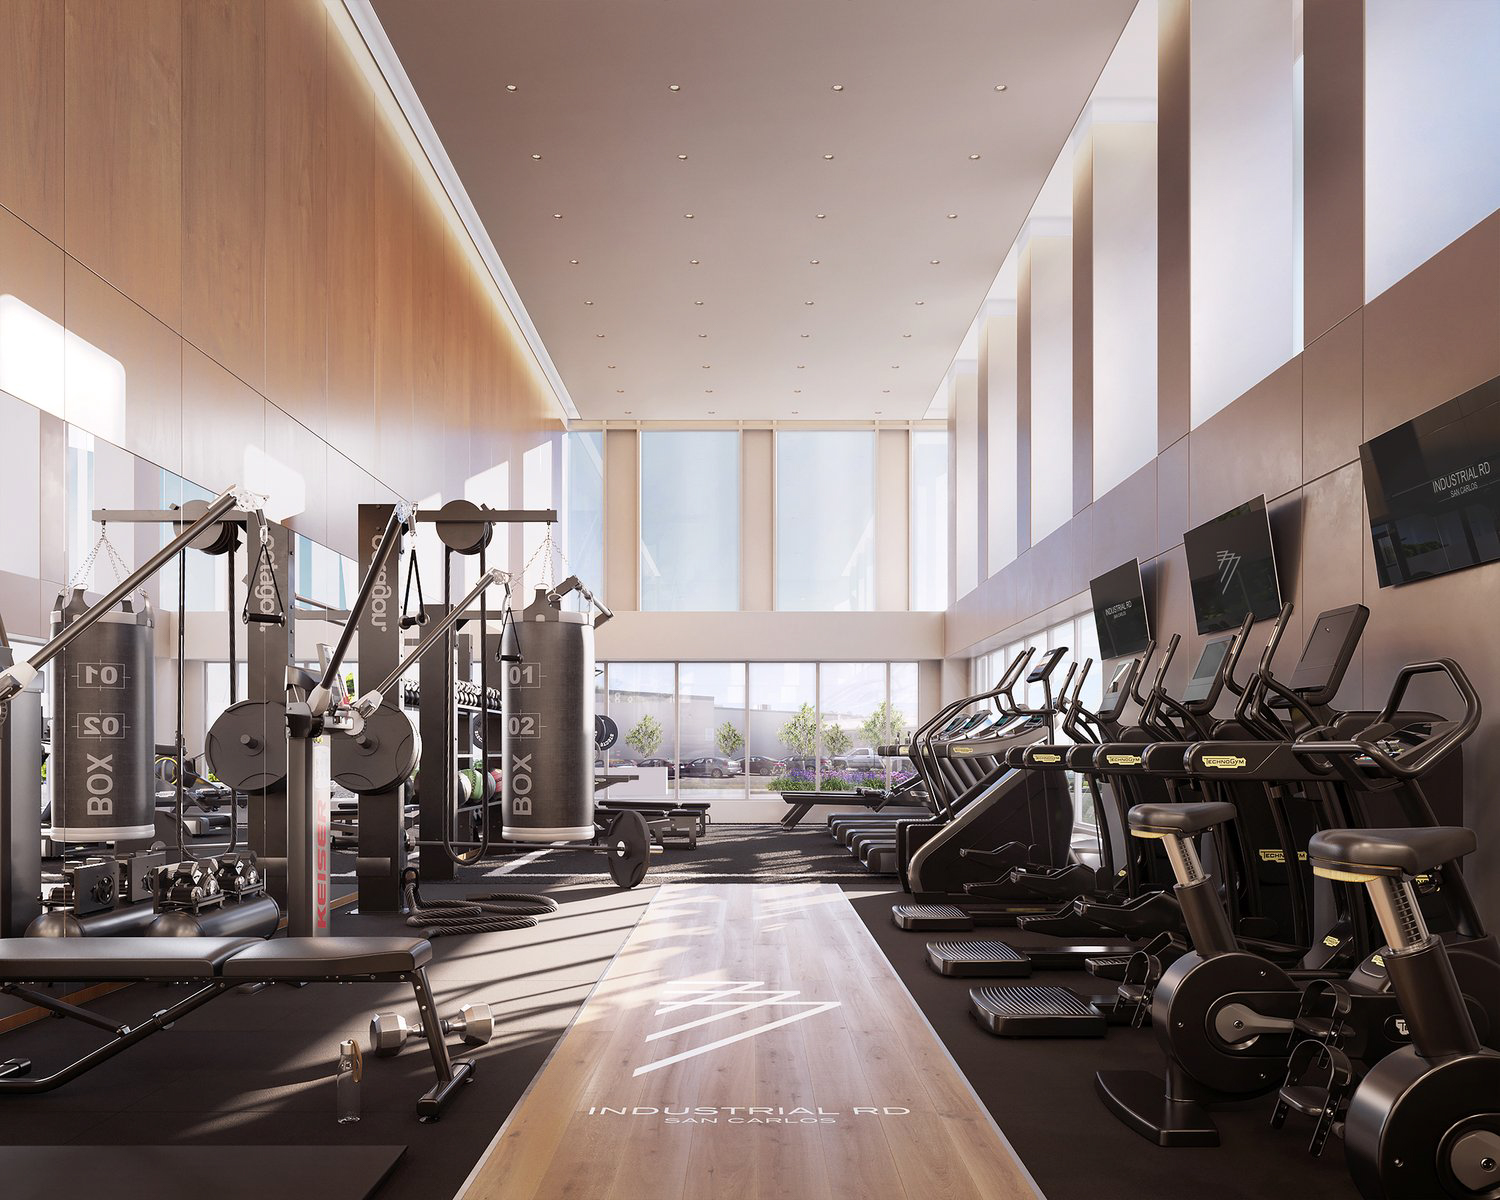 777 Industrial Road fitness center, rendering by Stanton Architecture